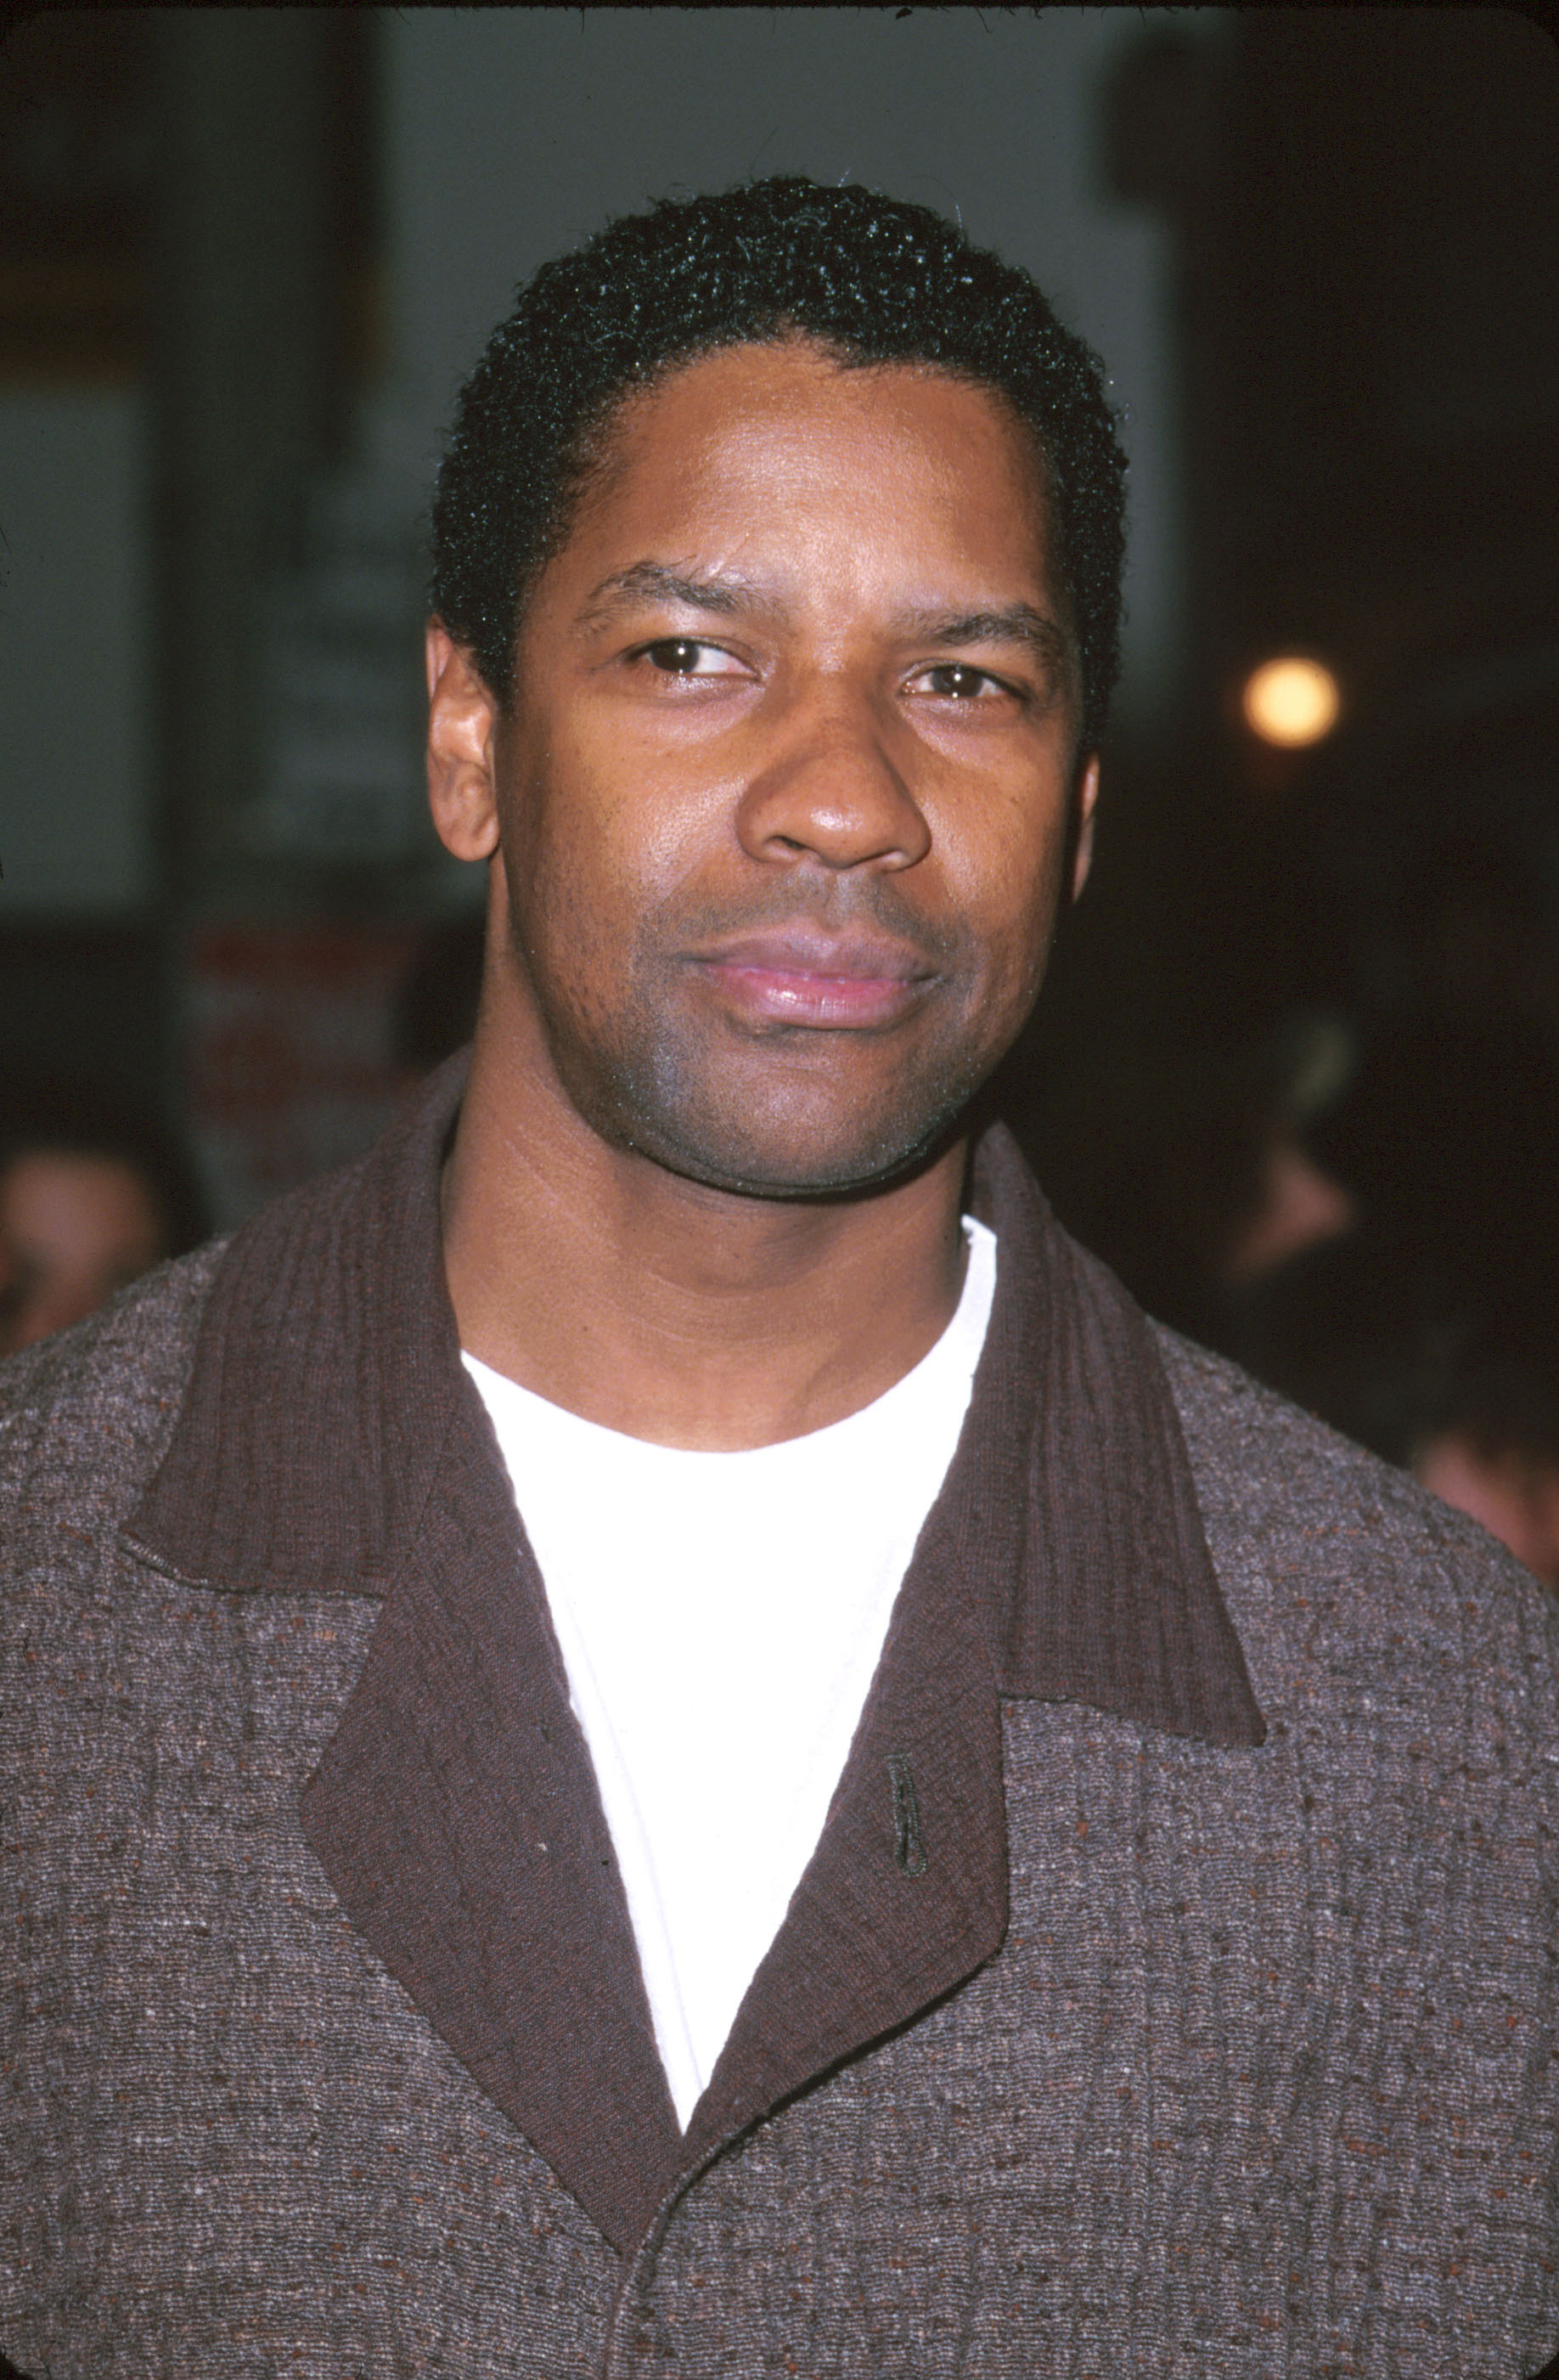 Denzel Washington in a smart casual jacket with a collared shirt at an event